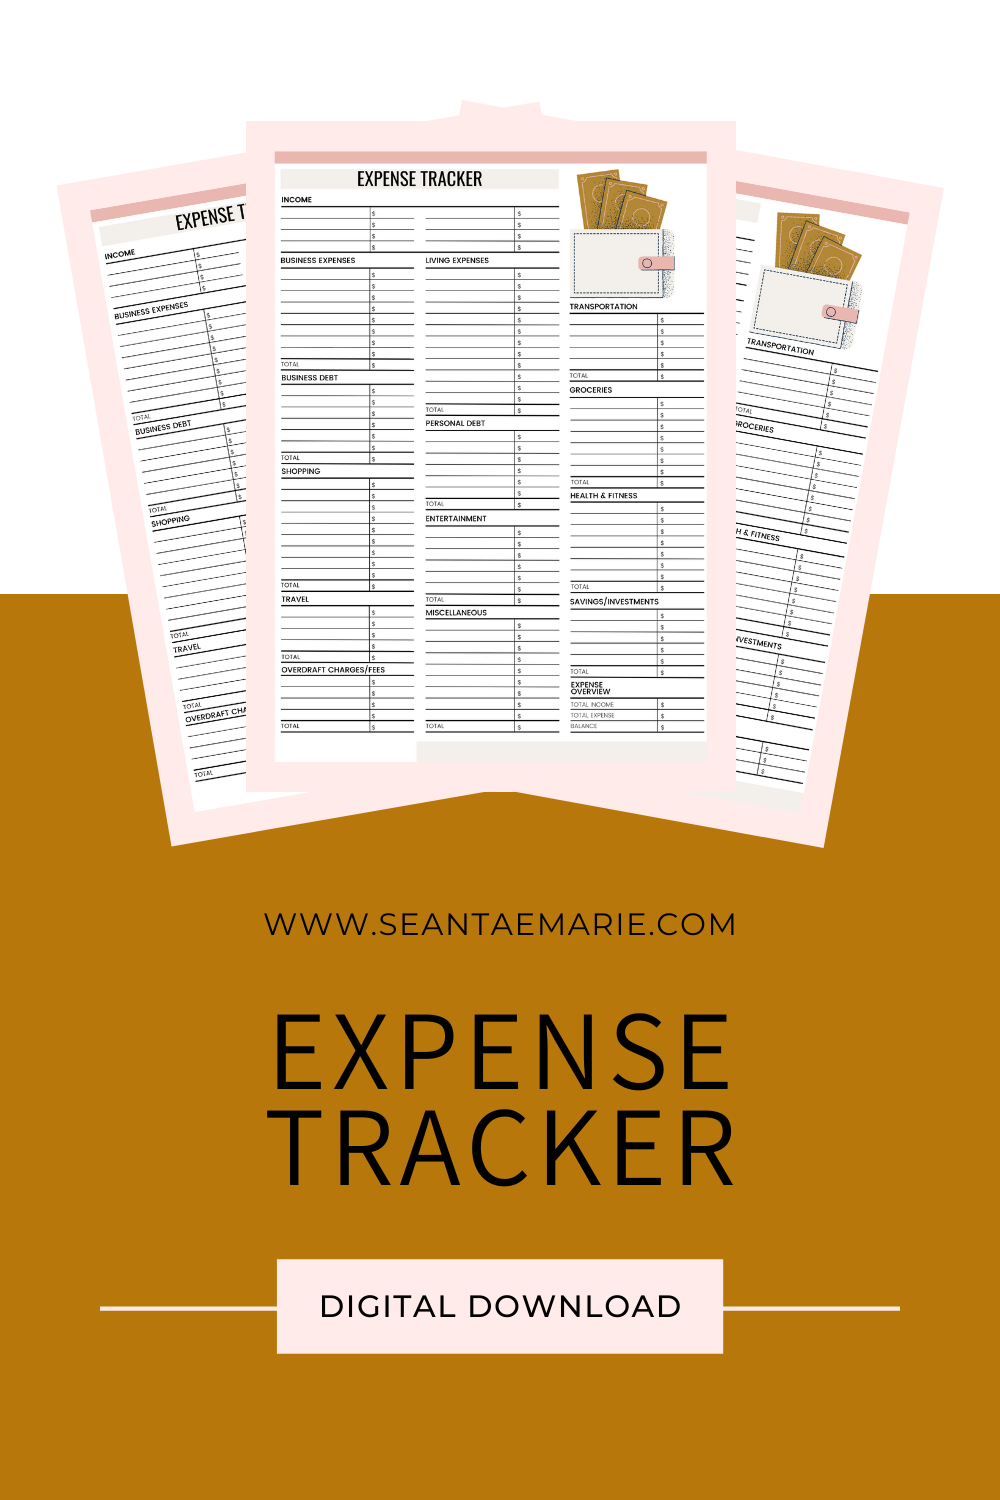 EXPENSE TRACKER TEMPLATE